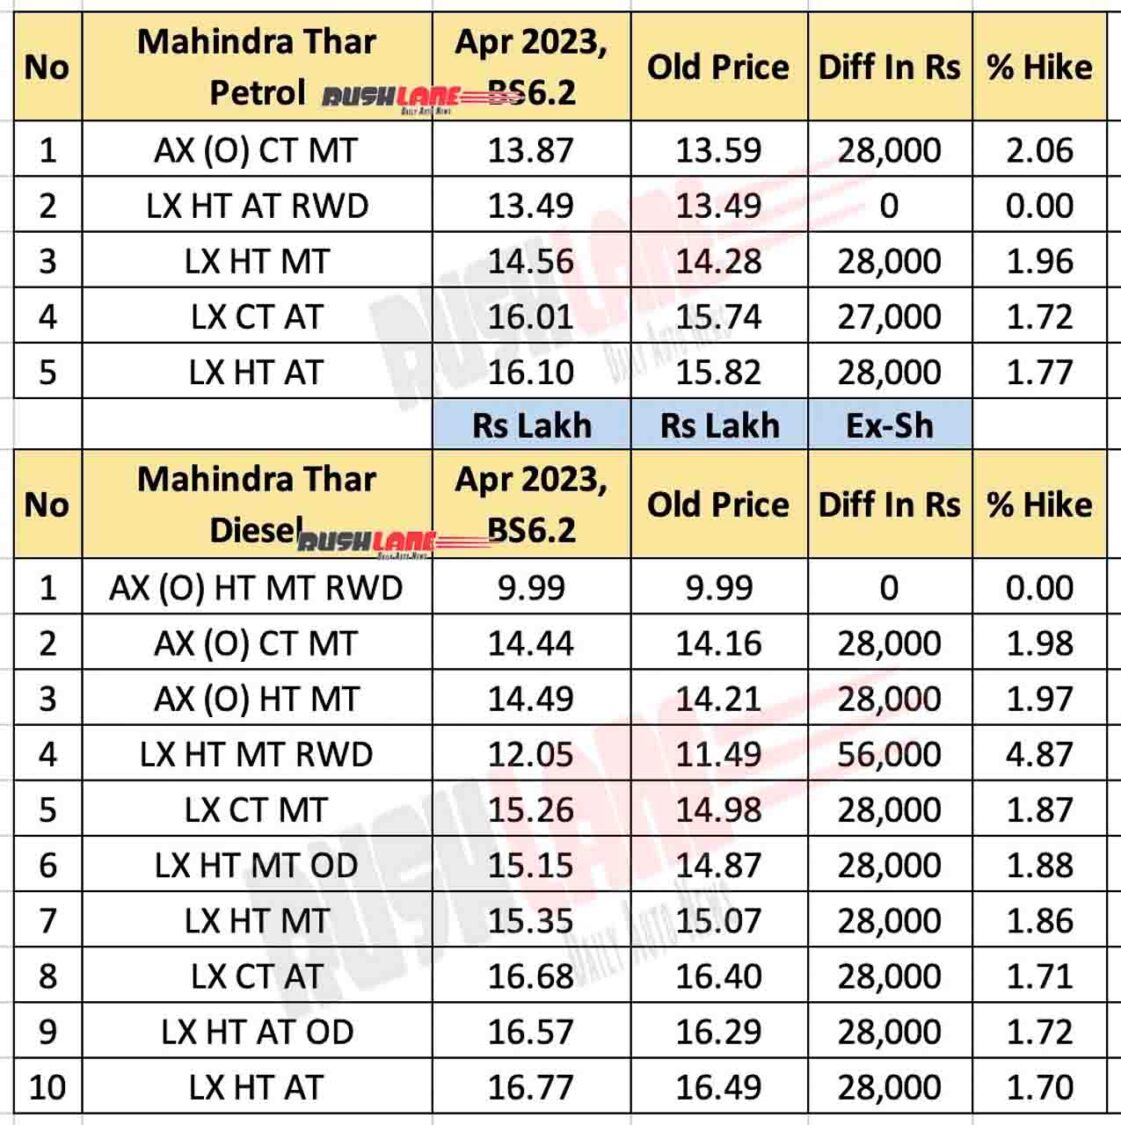 Mahindra Thar New Prices April 2023 - BS6 P2 update